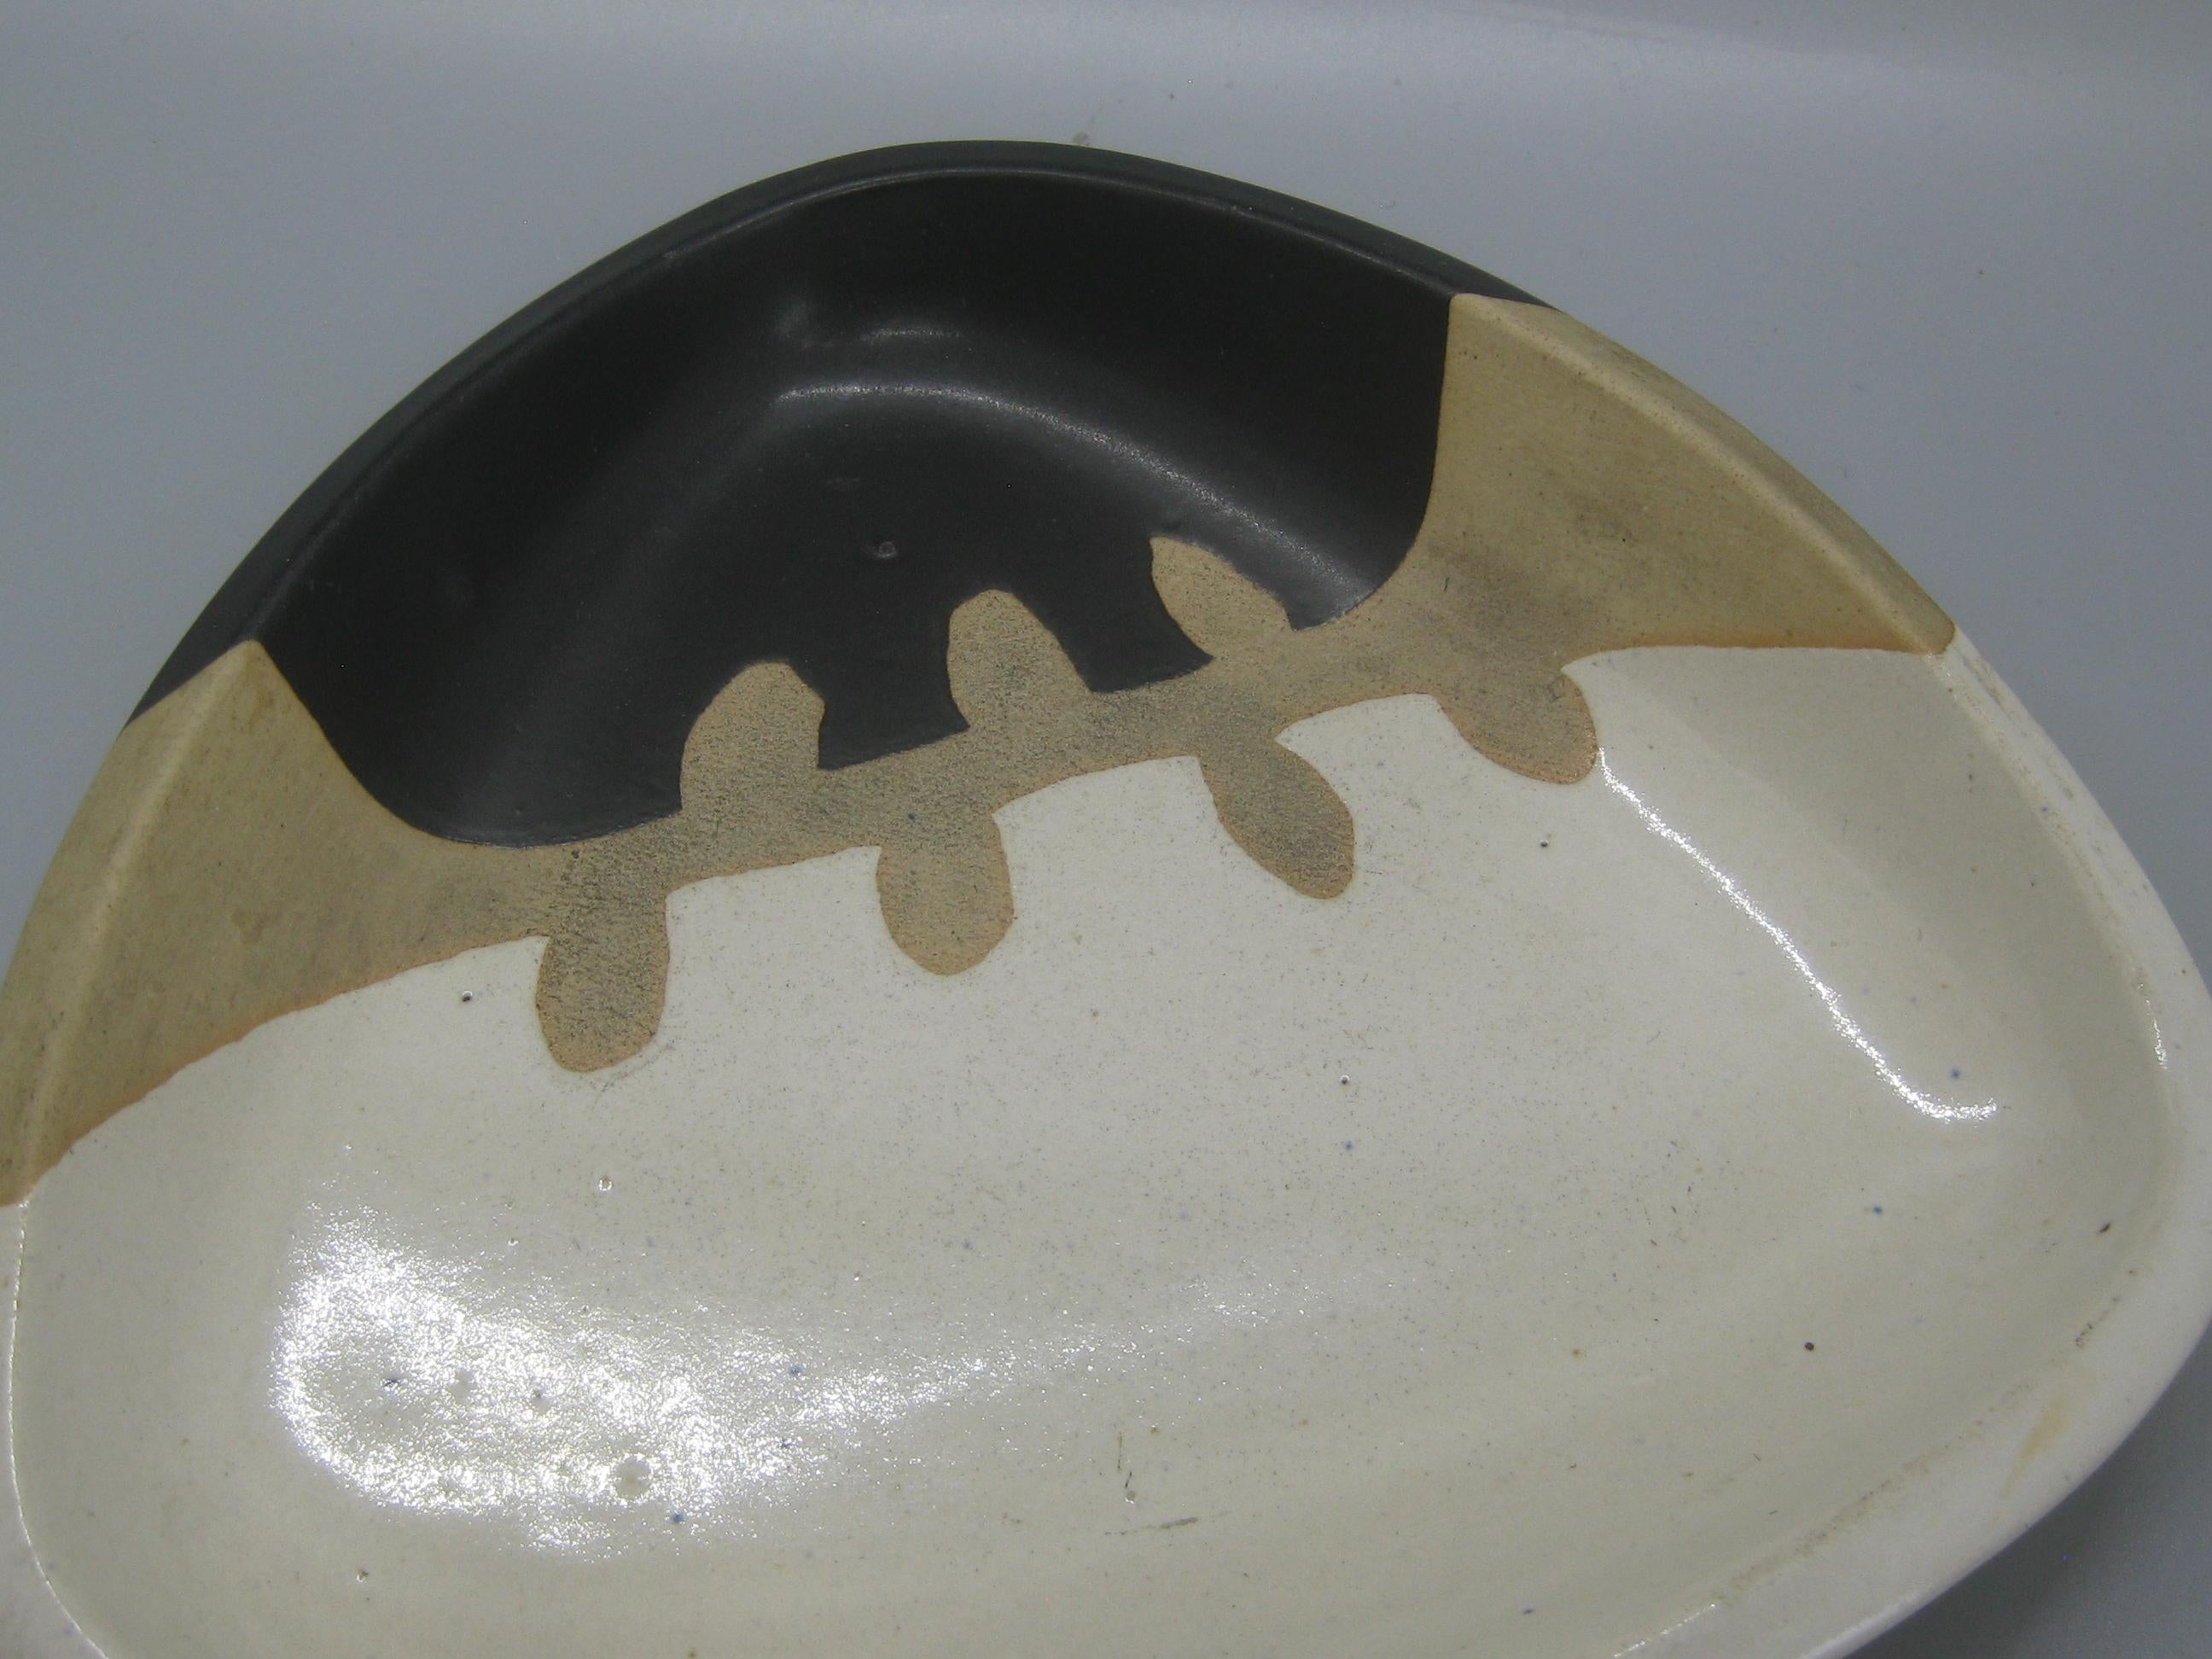 Great freeform modernist Studio Pottery low bowl by Walter Dexter, circa 1960s. Seldom seen Studio Pottery by this Canadian artist. Signed on the bottom as seen in the photos. Great form and design. Measures approximate: 7 1/2